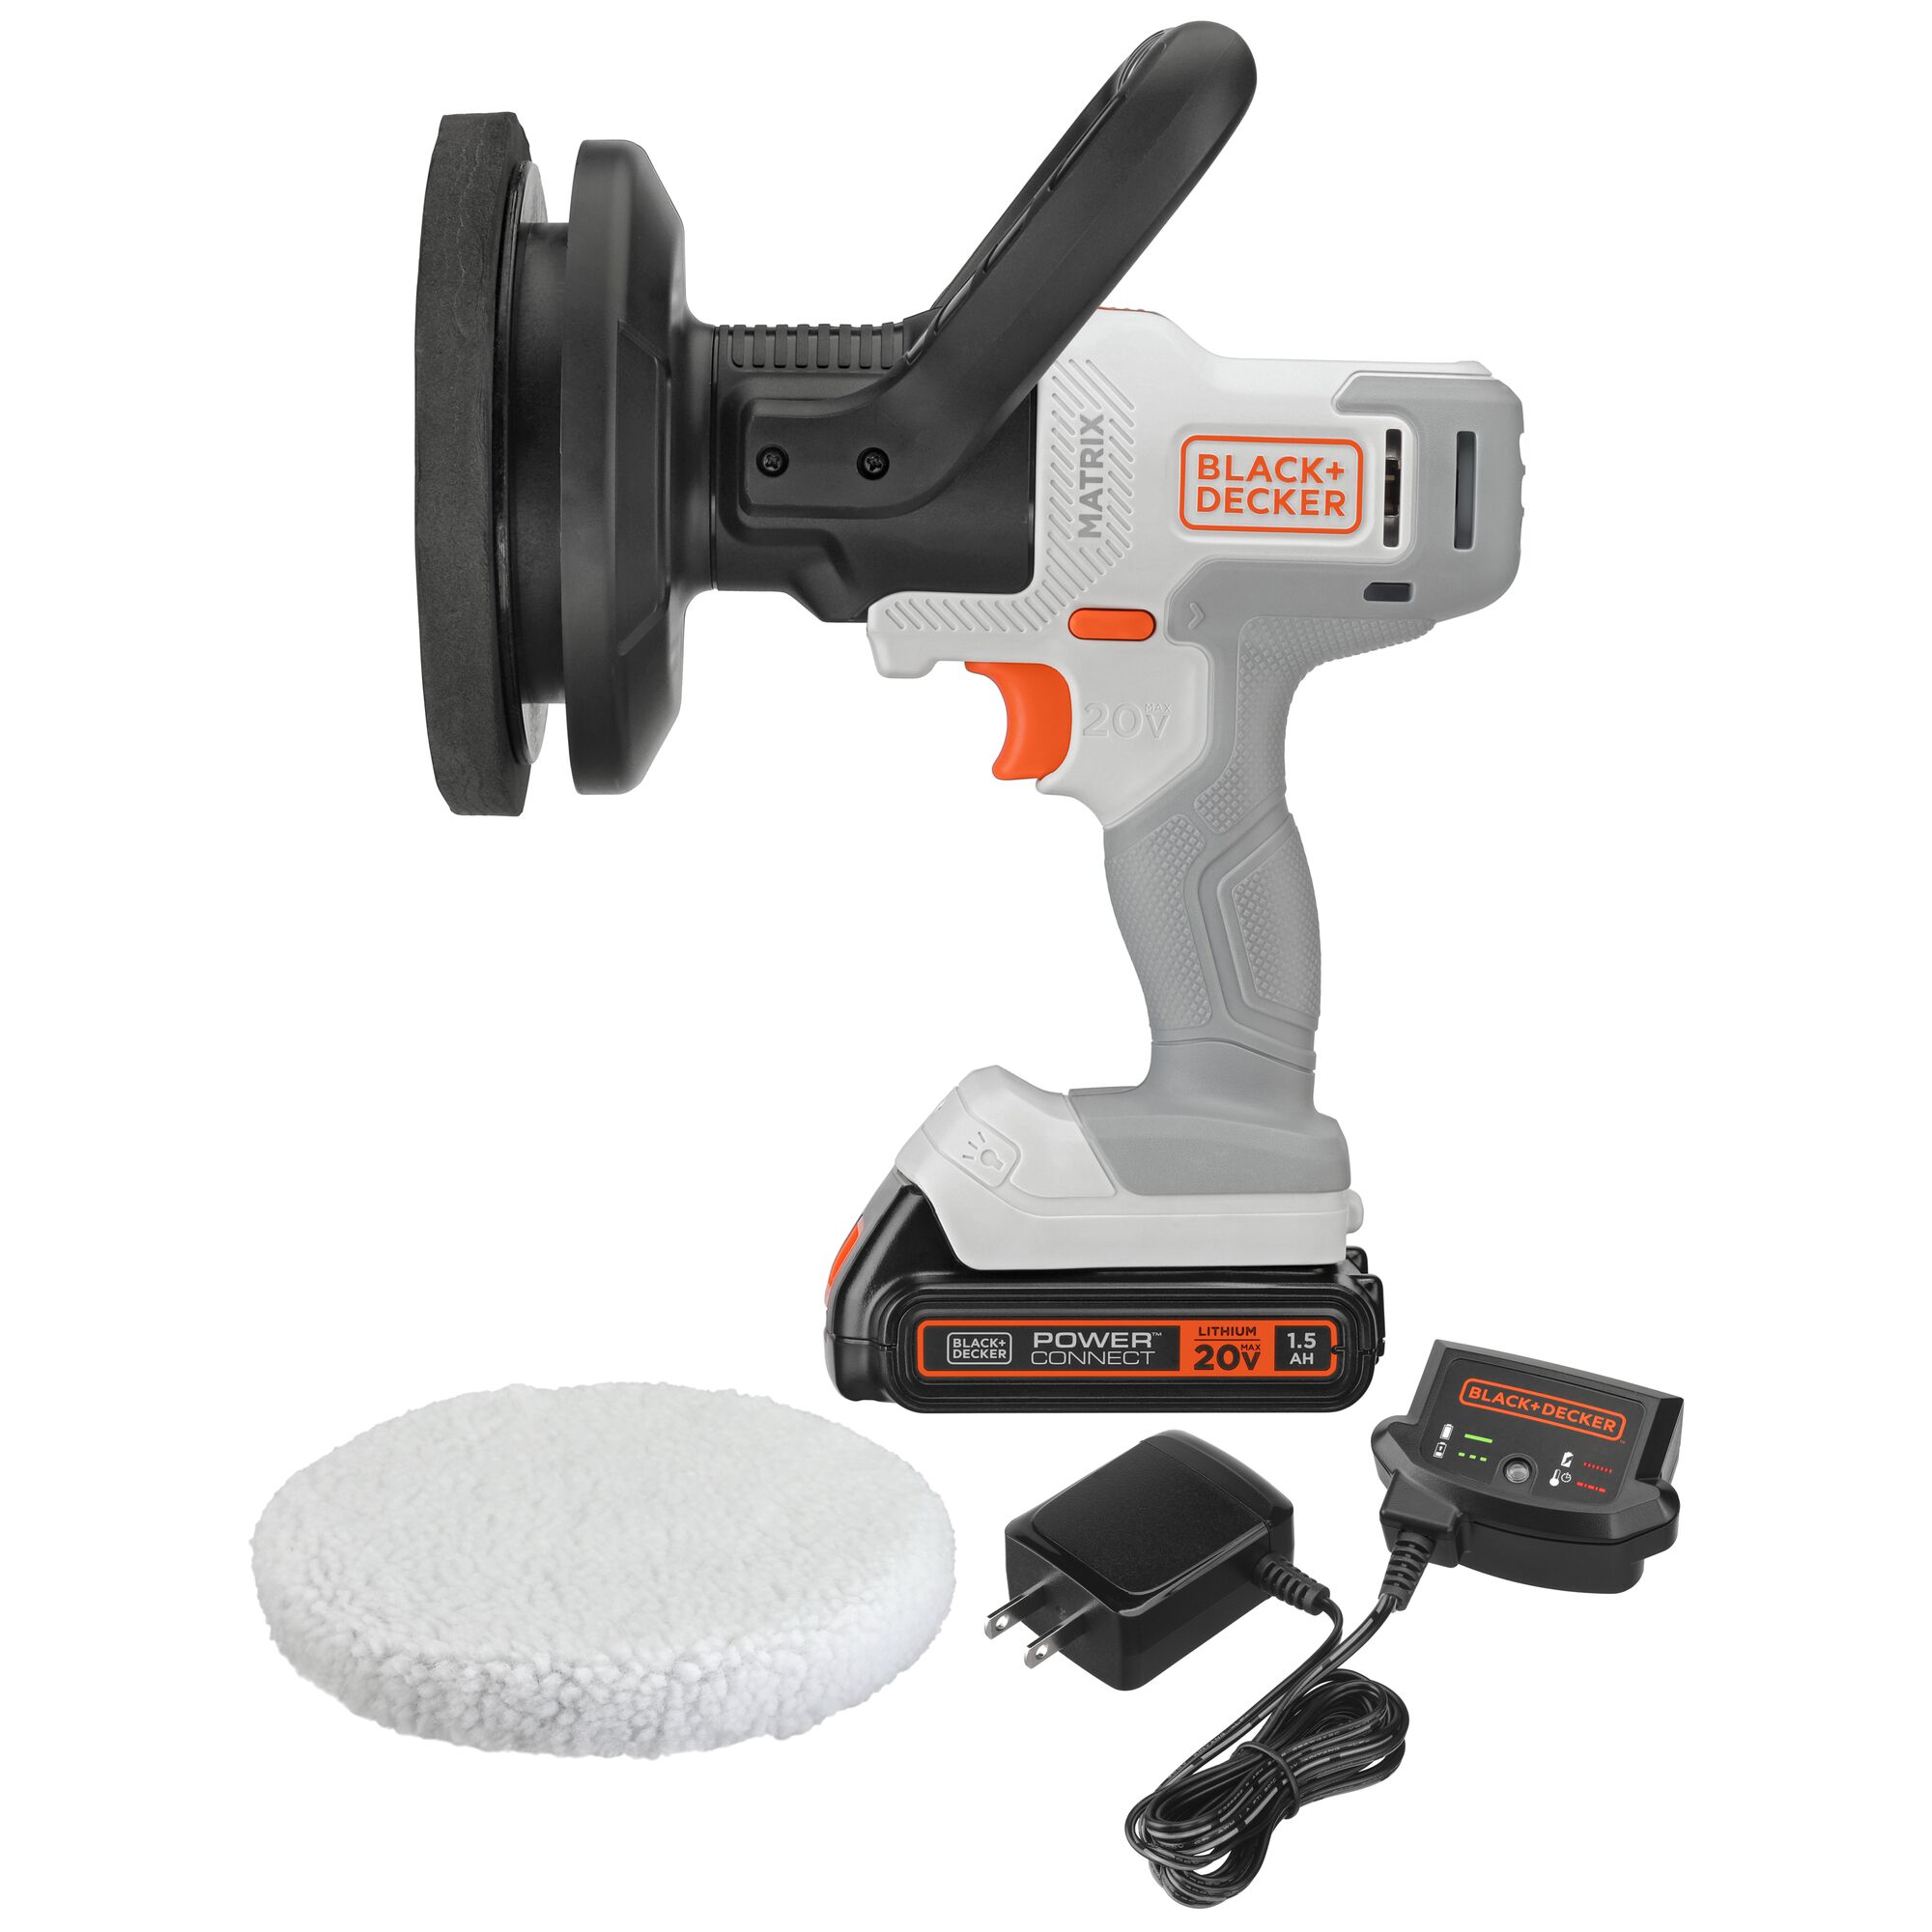 MATRIX 20 volt MAX lithium drill driver with complete kit.